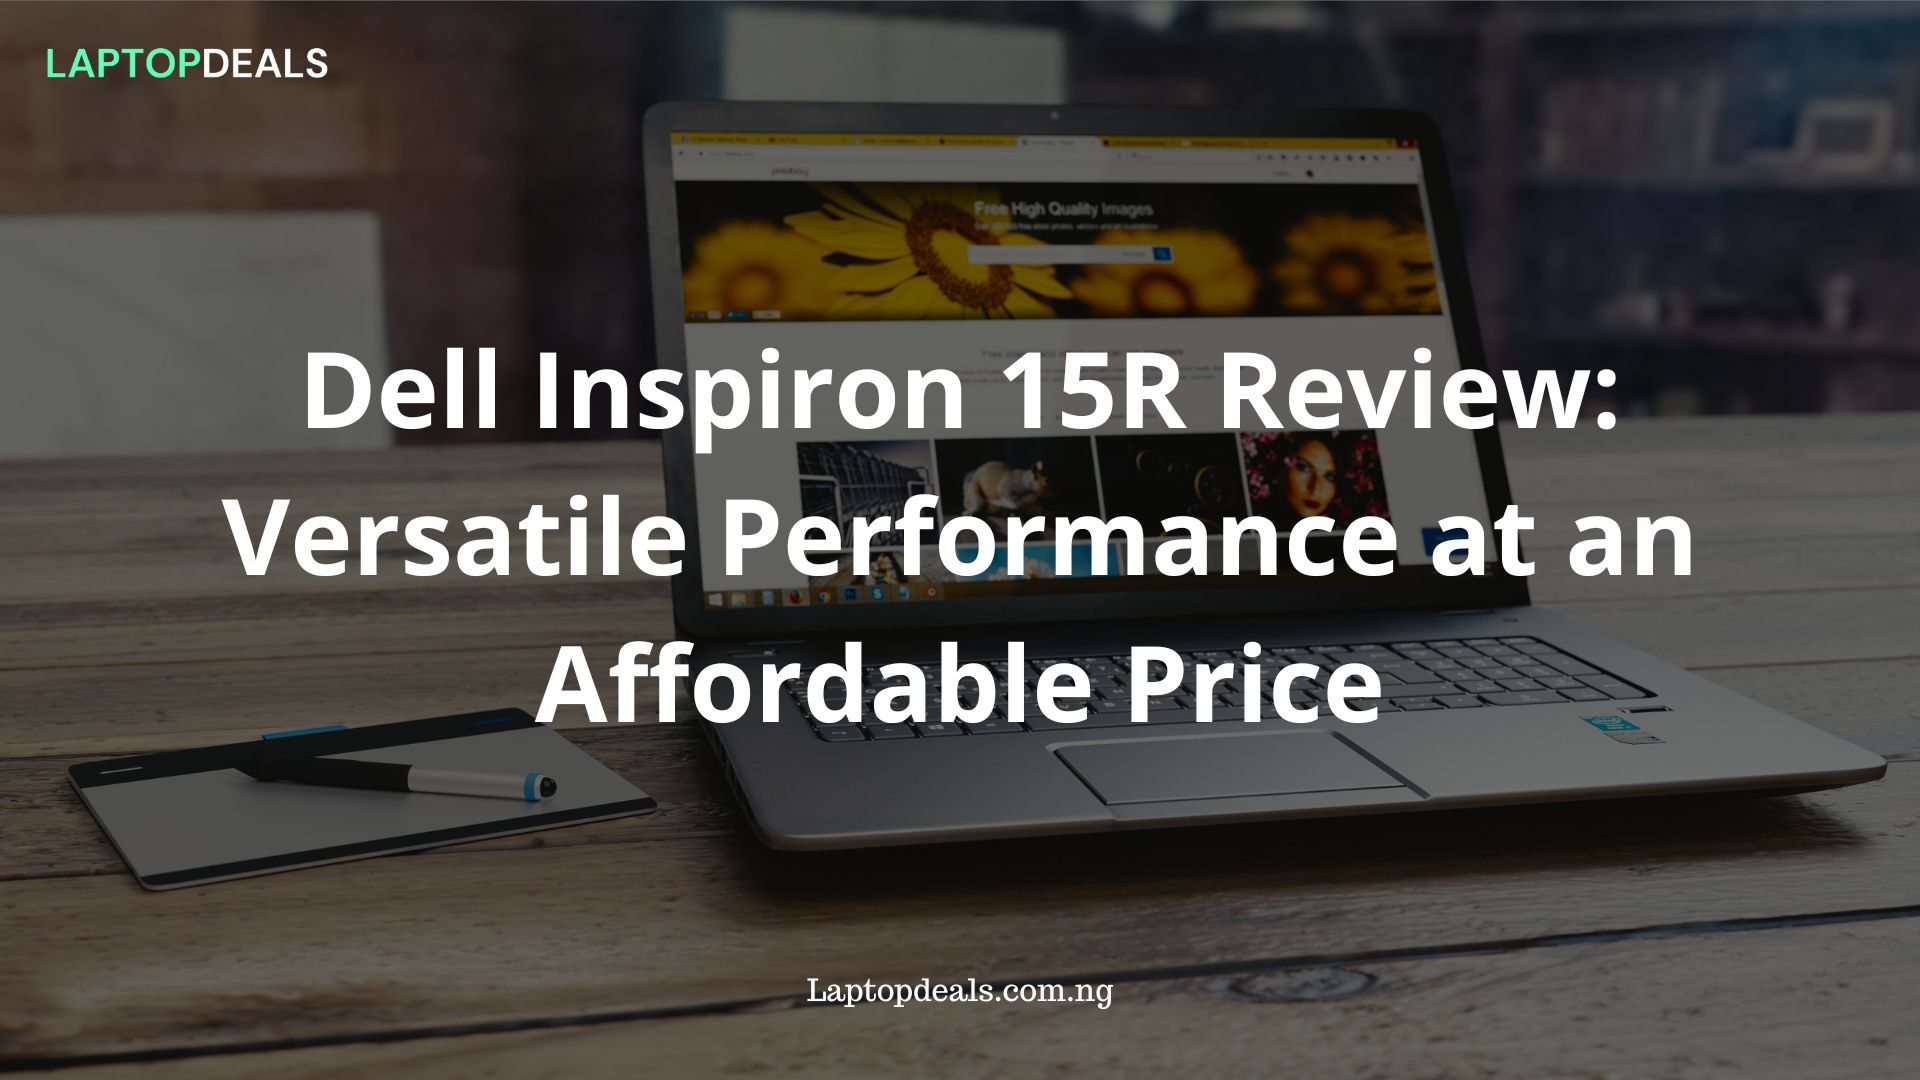 Dell Inspiron 15R Review